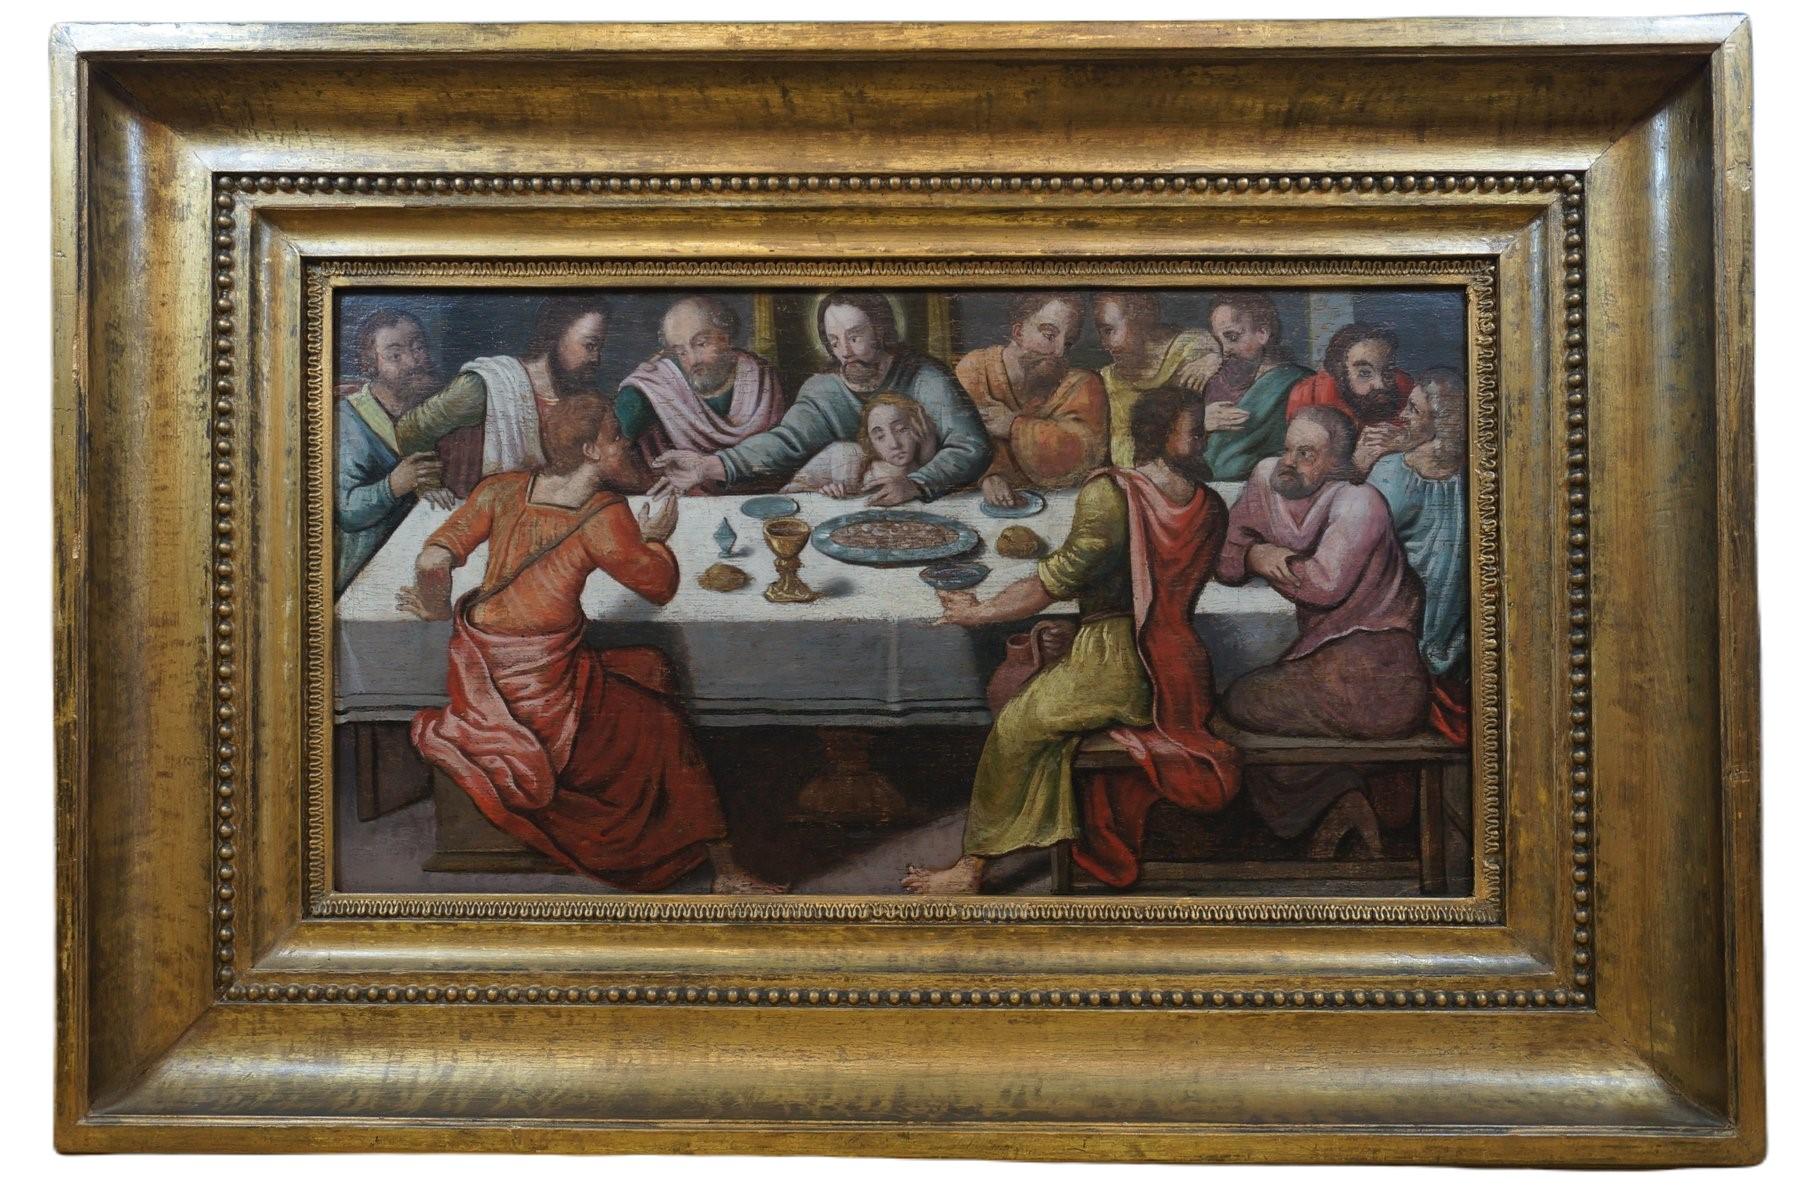 Unknown Figurative Painting - Anrique oil painting, Last Supper, German school, Renaissance, Late 16th c.